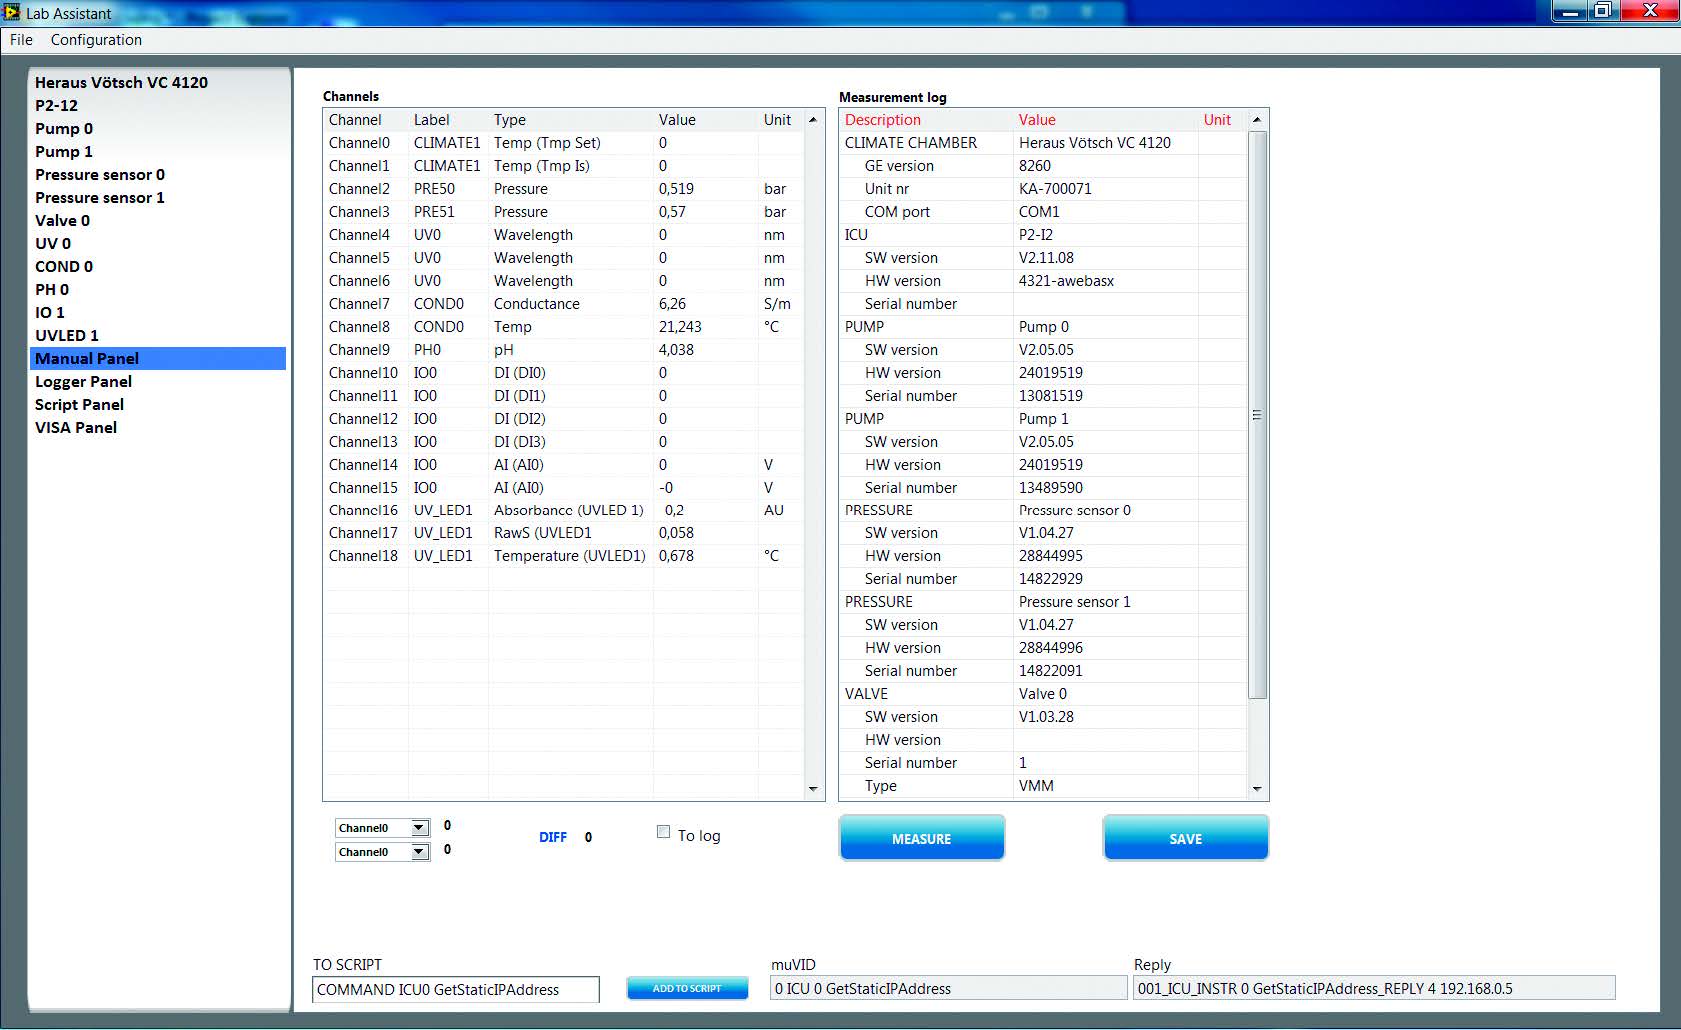 LabAssistant user interface,